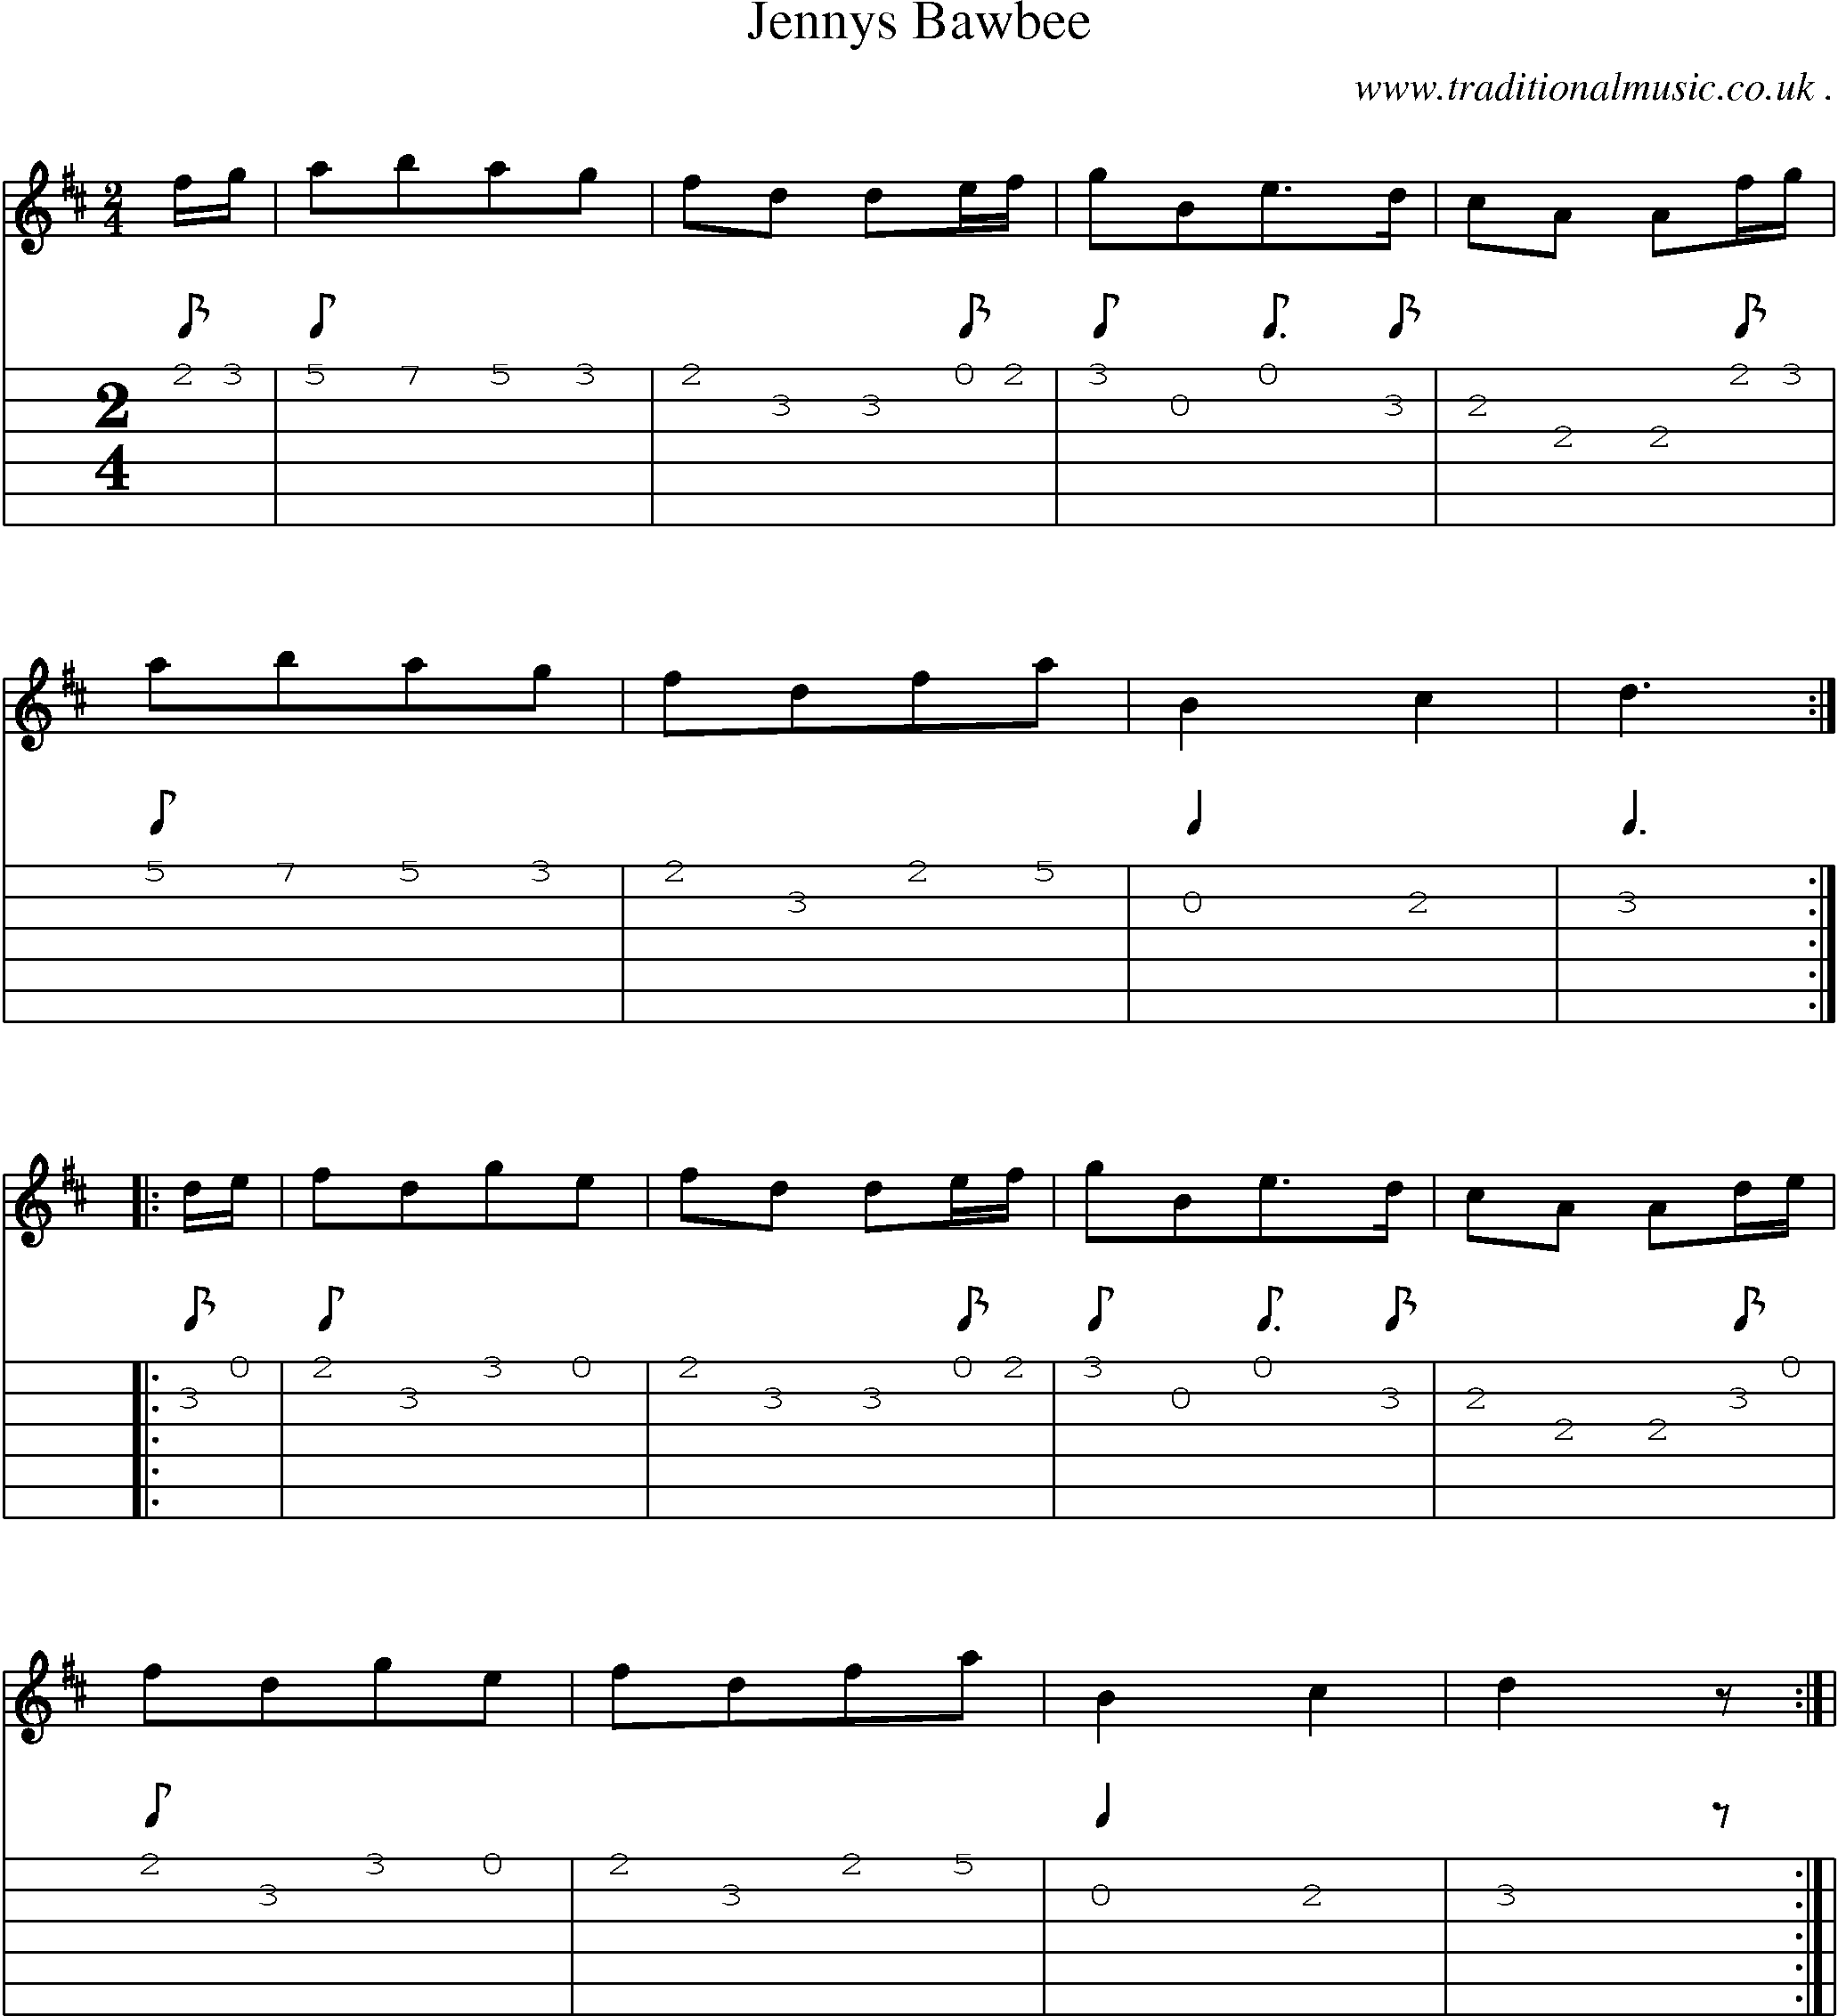 Sheet-Music and Guitar Tabs for Jennys Bawbee